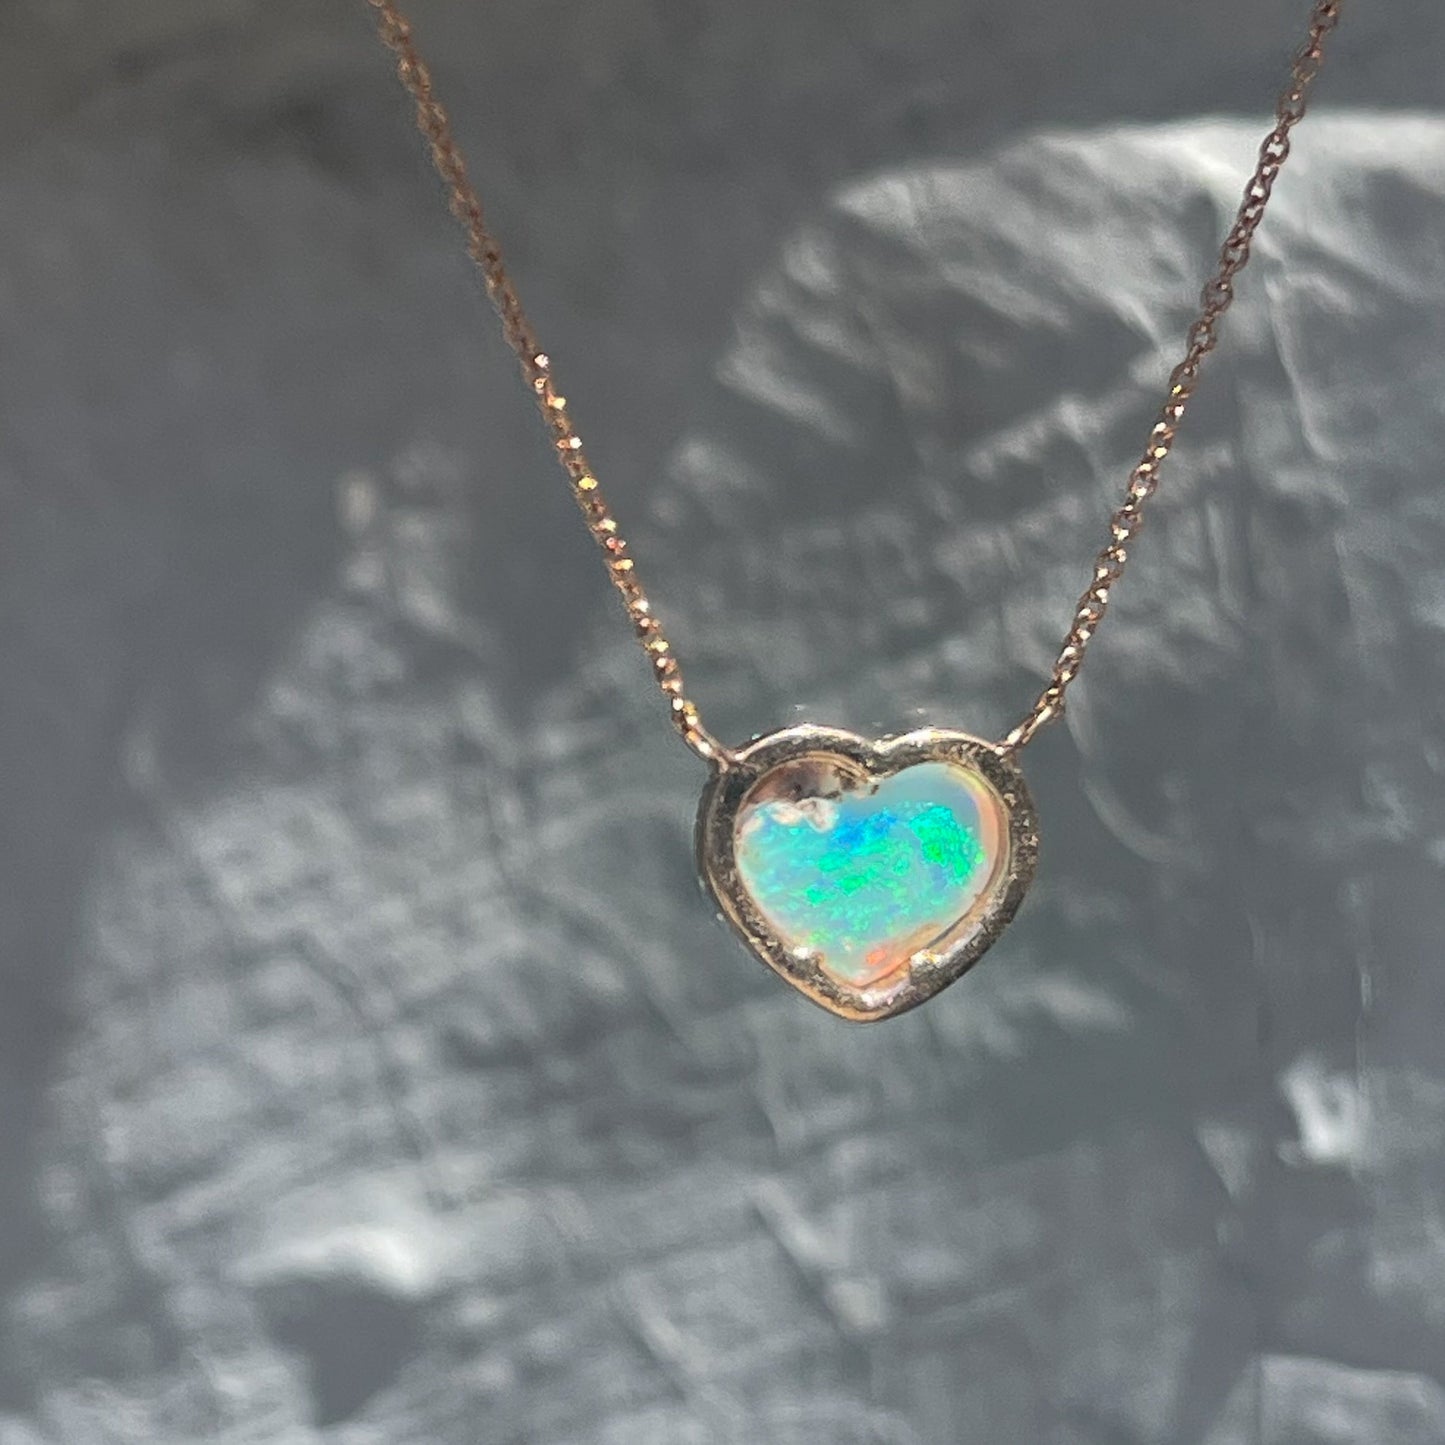 Back view of an Opal Heart Necklace by NIXIN Jewelry. The opal is set in rose gold and hangs from an Italian chain.